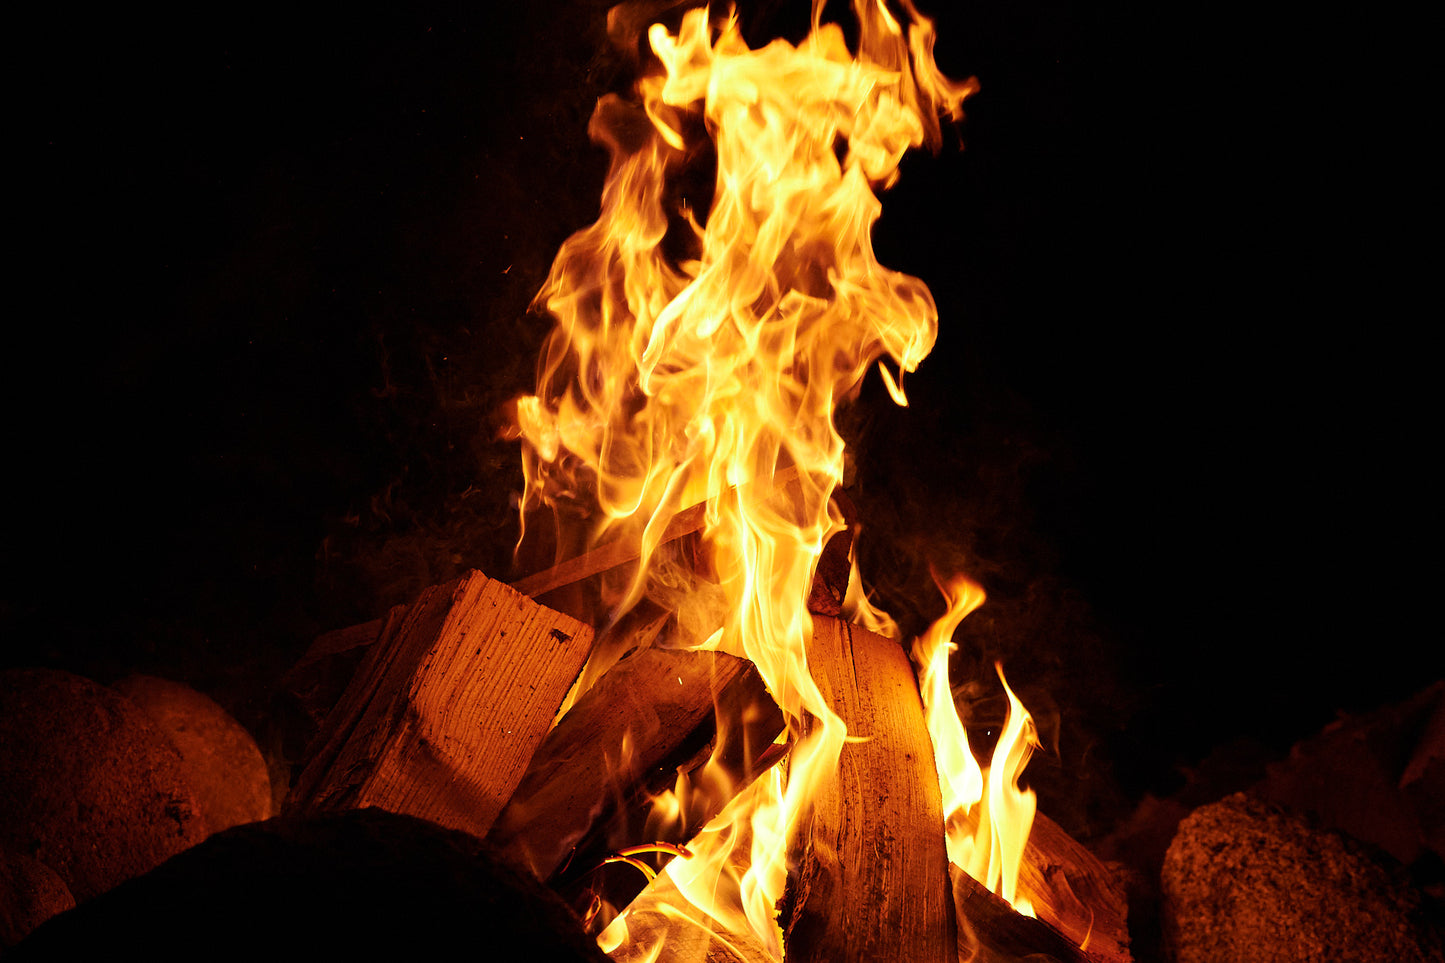 Focus view of a campfire outdoors